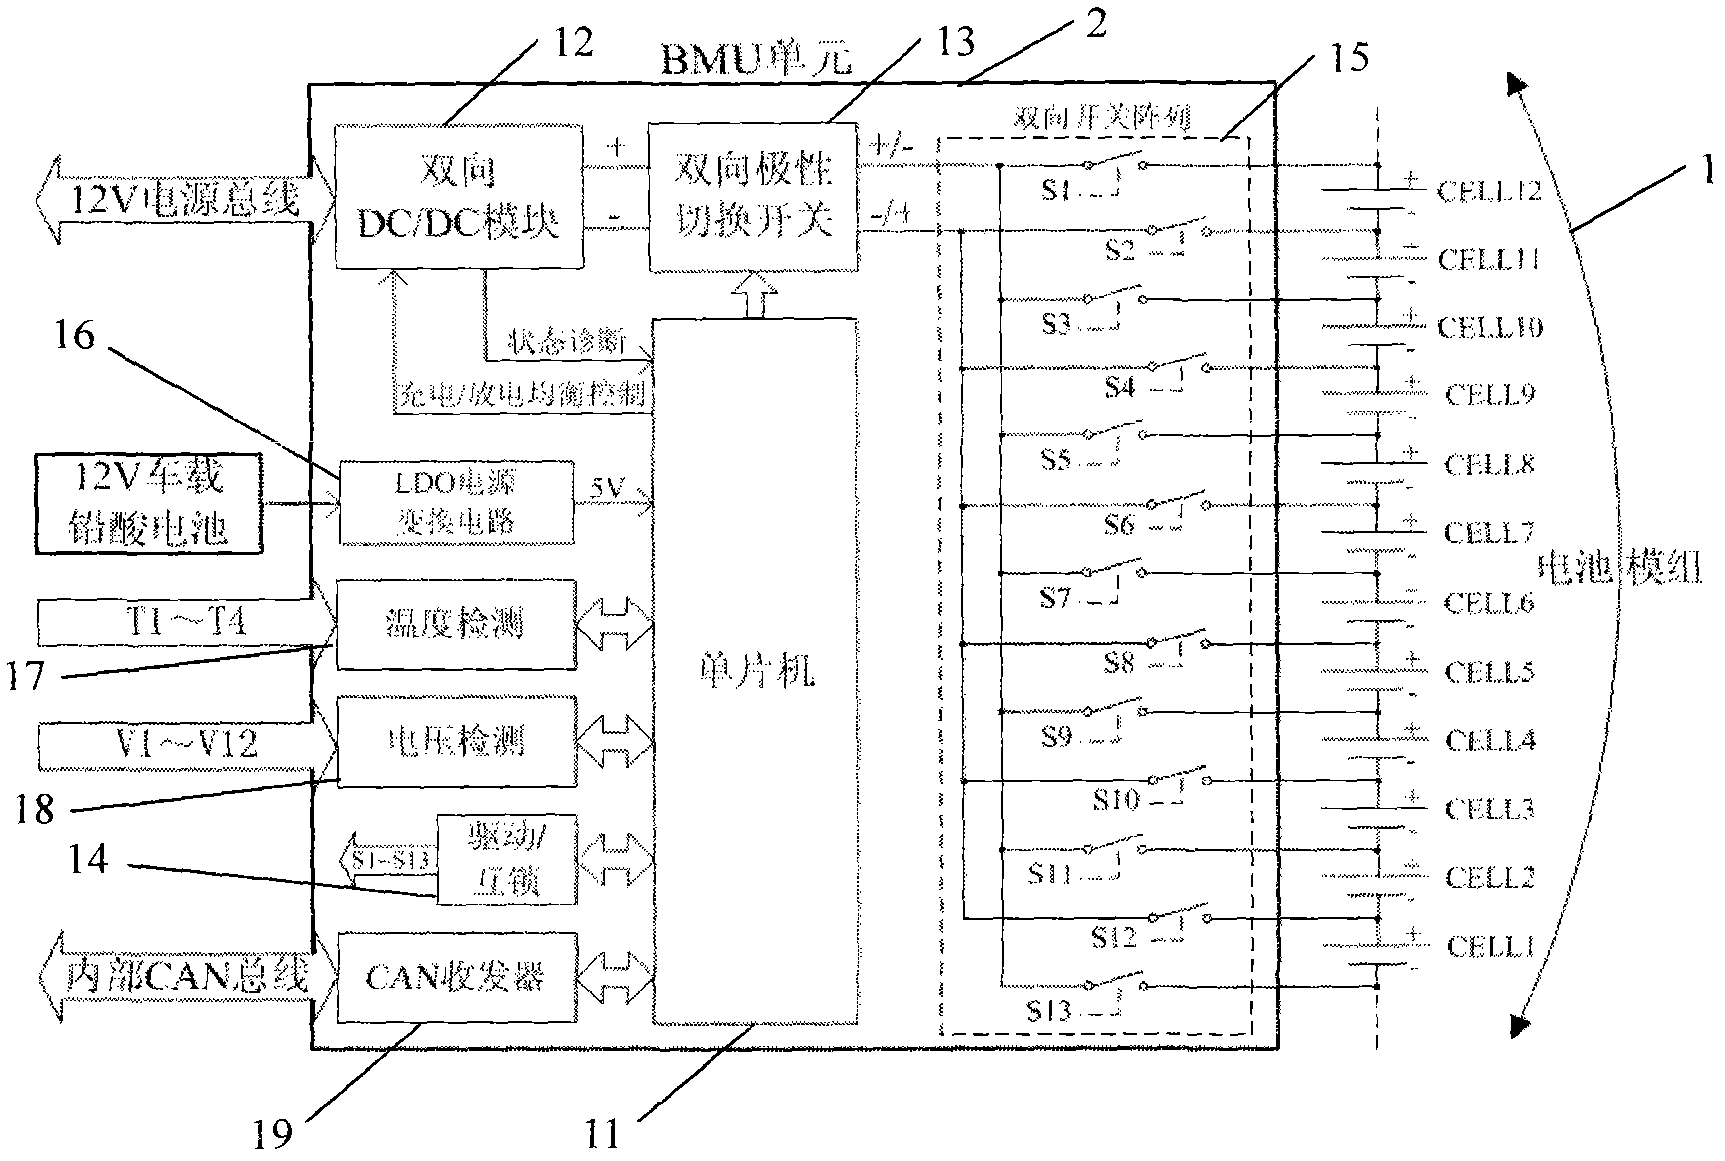 Cell equalization system based on bidirectional DC/DC